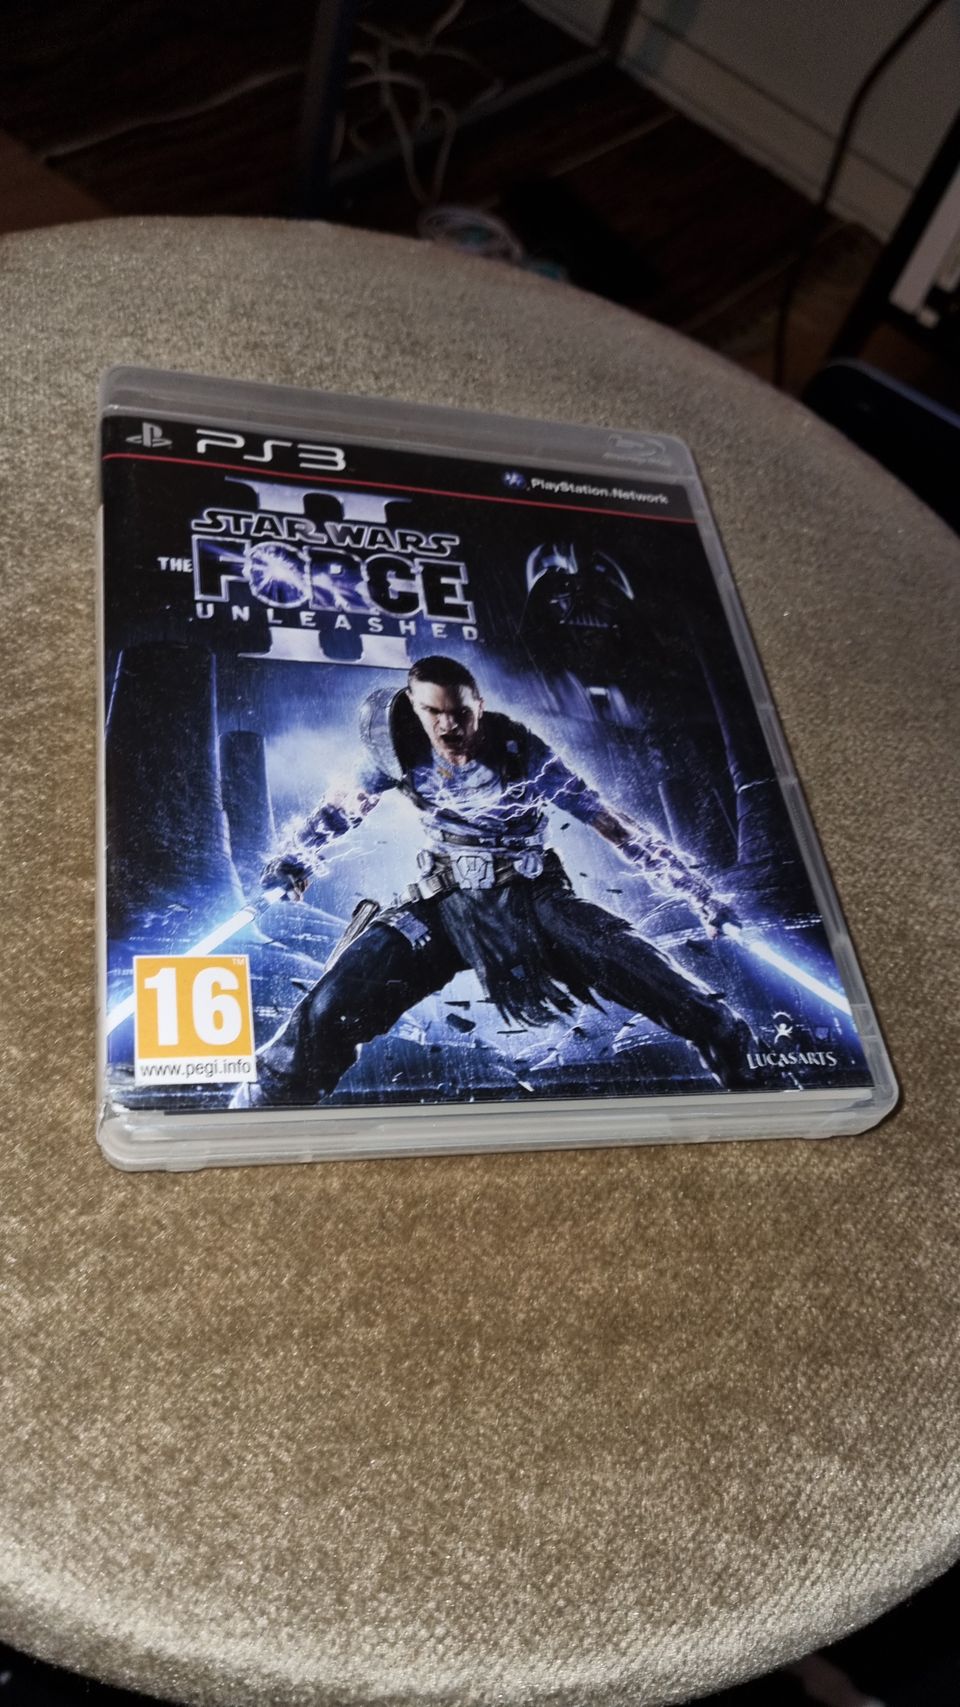 PS3/Playstation 3: Star Wars "The Force Unleashed 2"